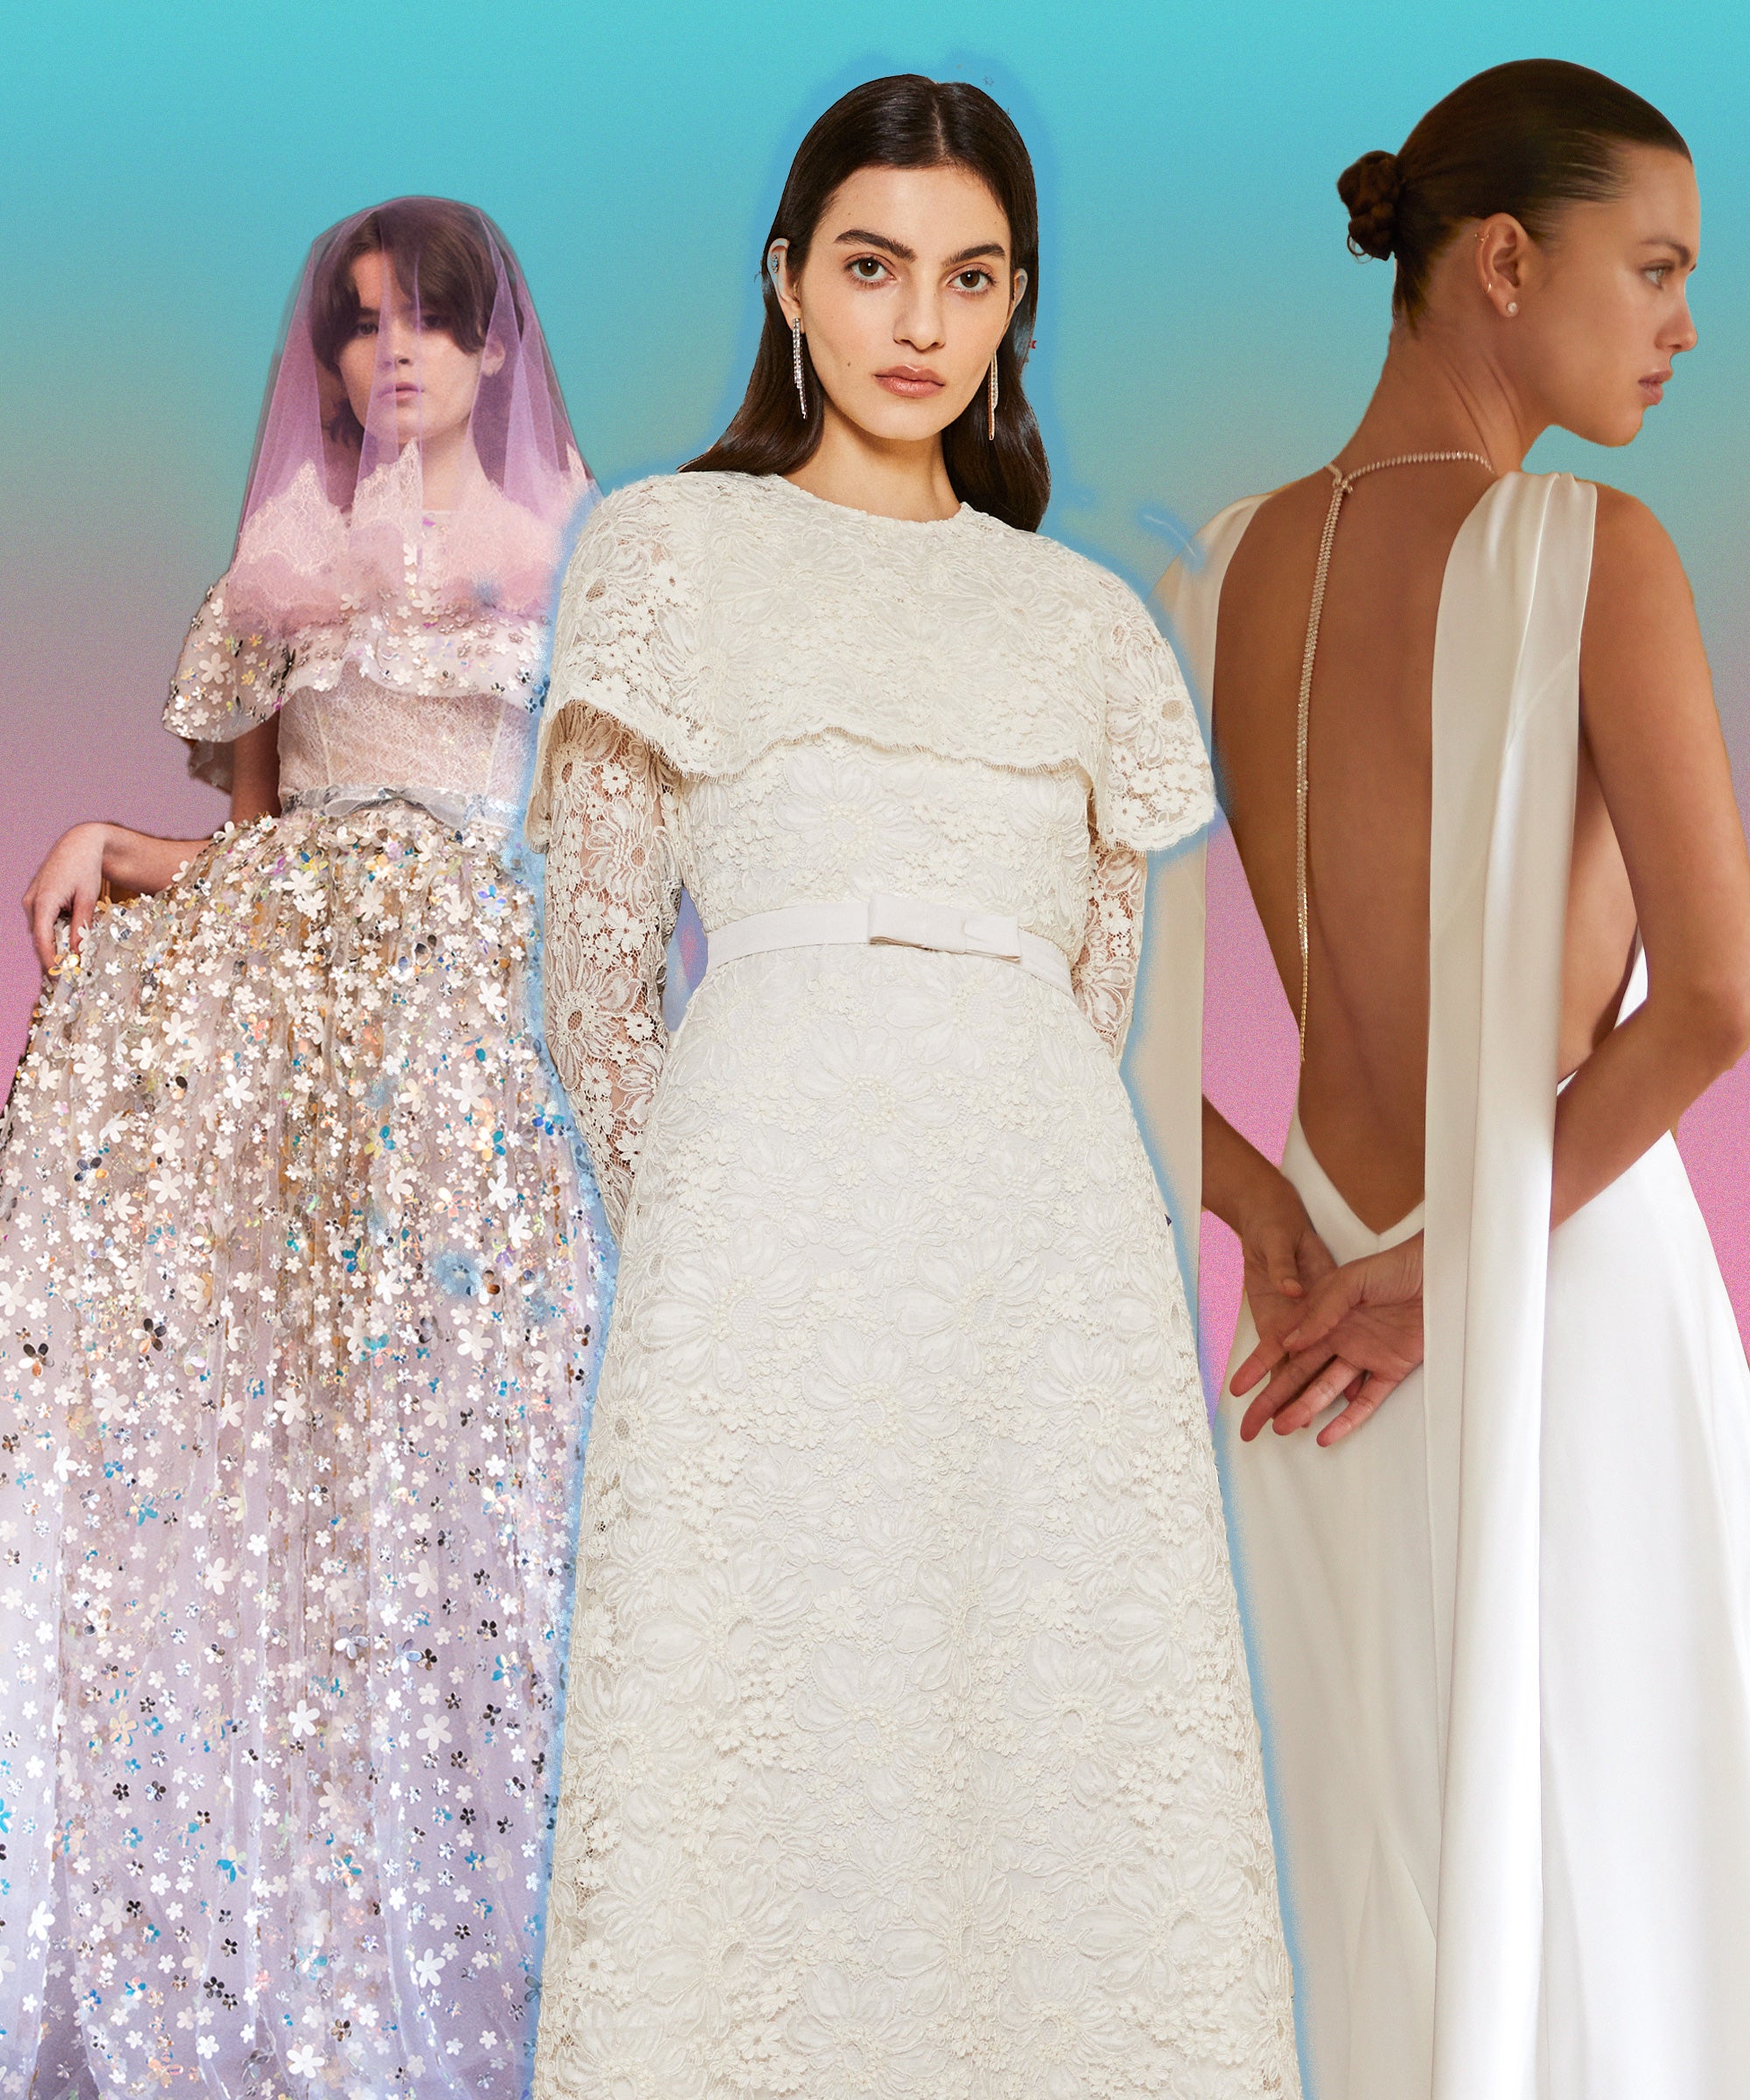 A Fashion Trend We're Loving: Brides Wearing Capes